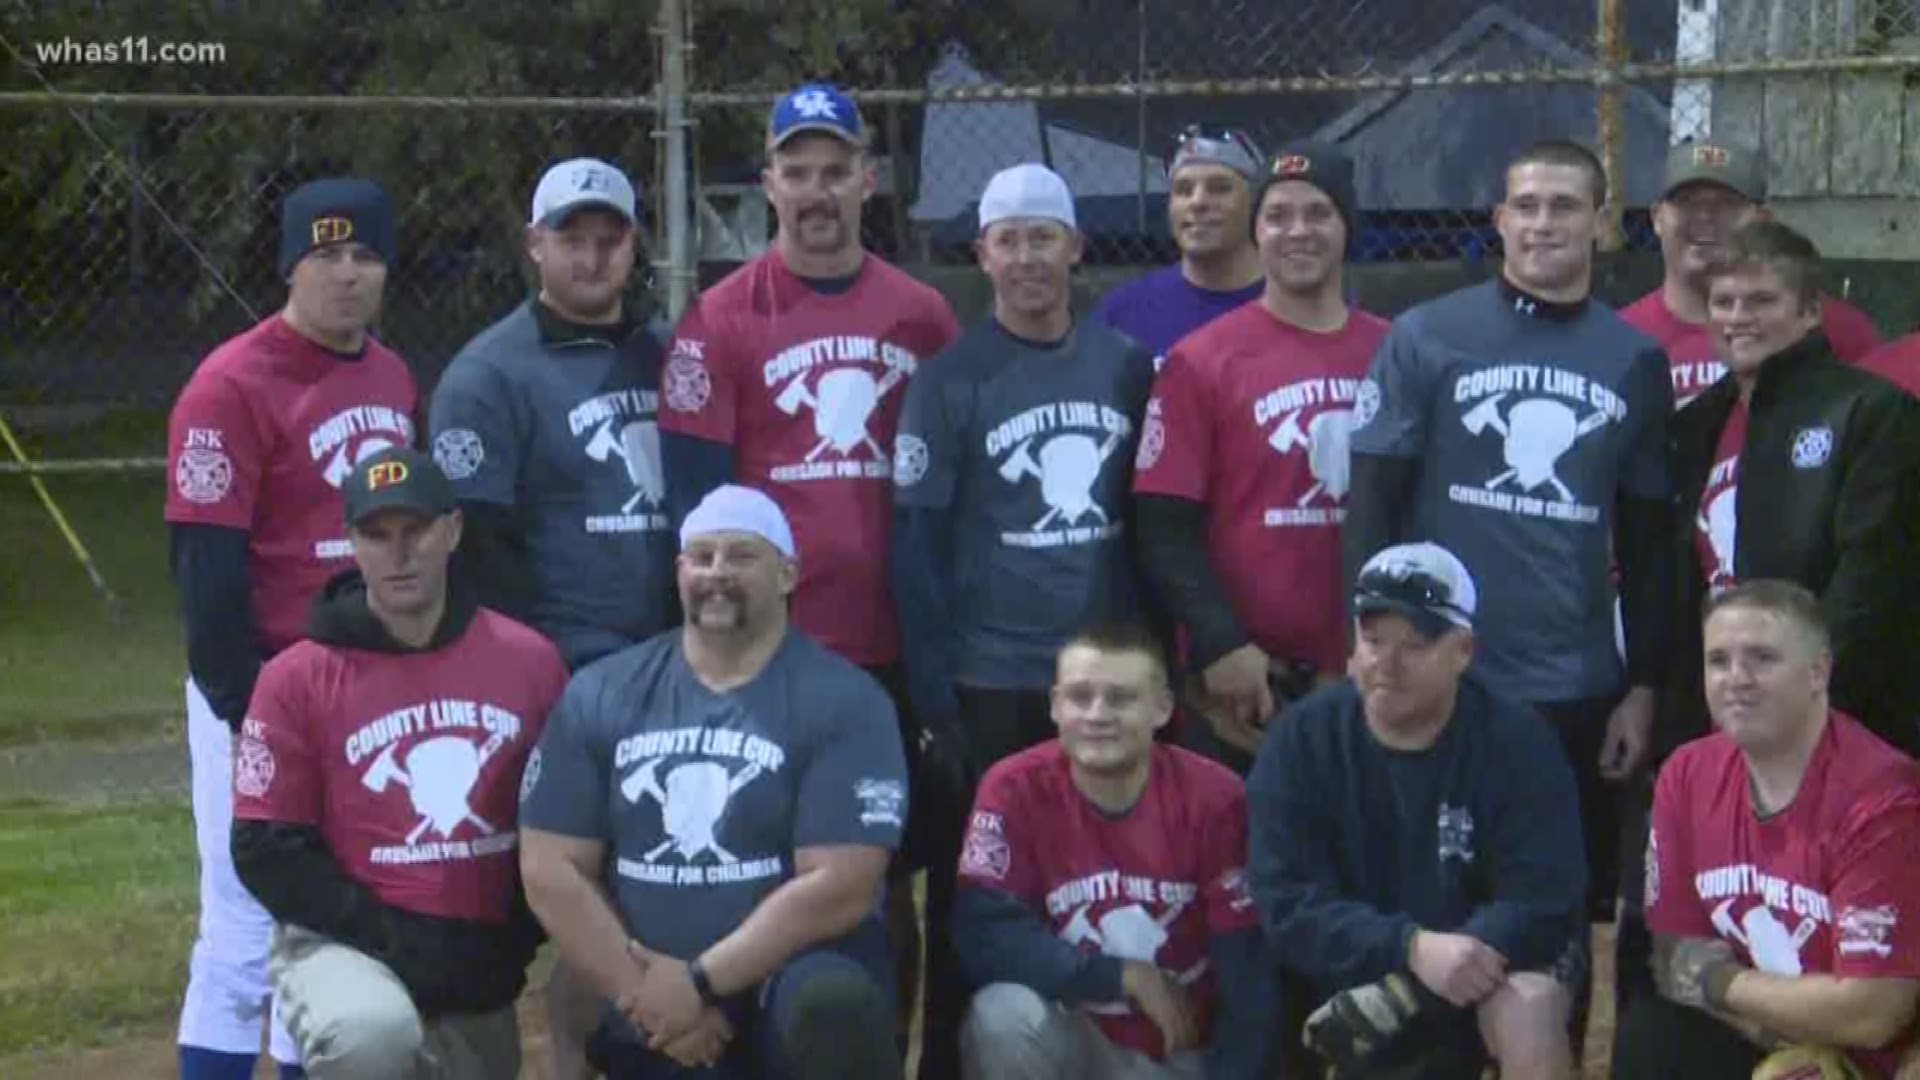 the Okolona Fire Department held a softball tournament with all the proceeds going to the WHAS Crusade for Children.